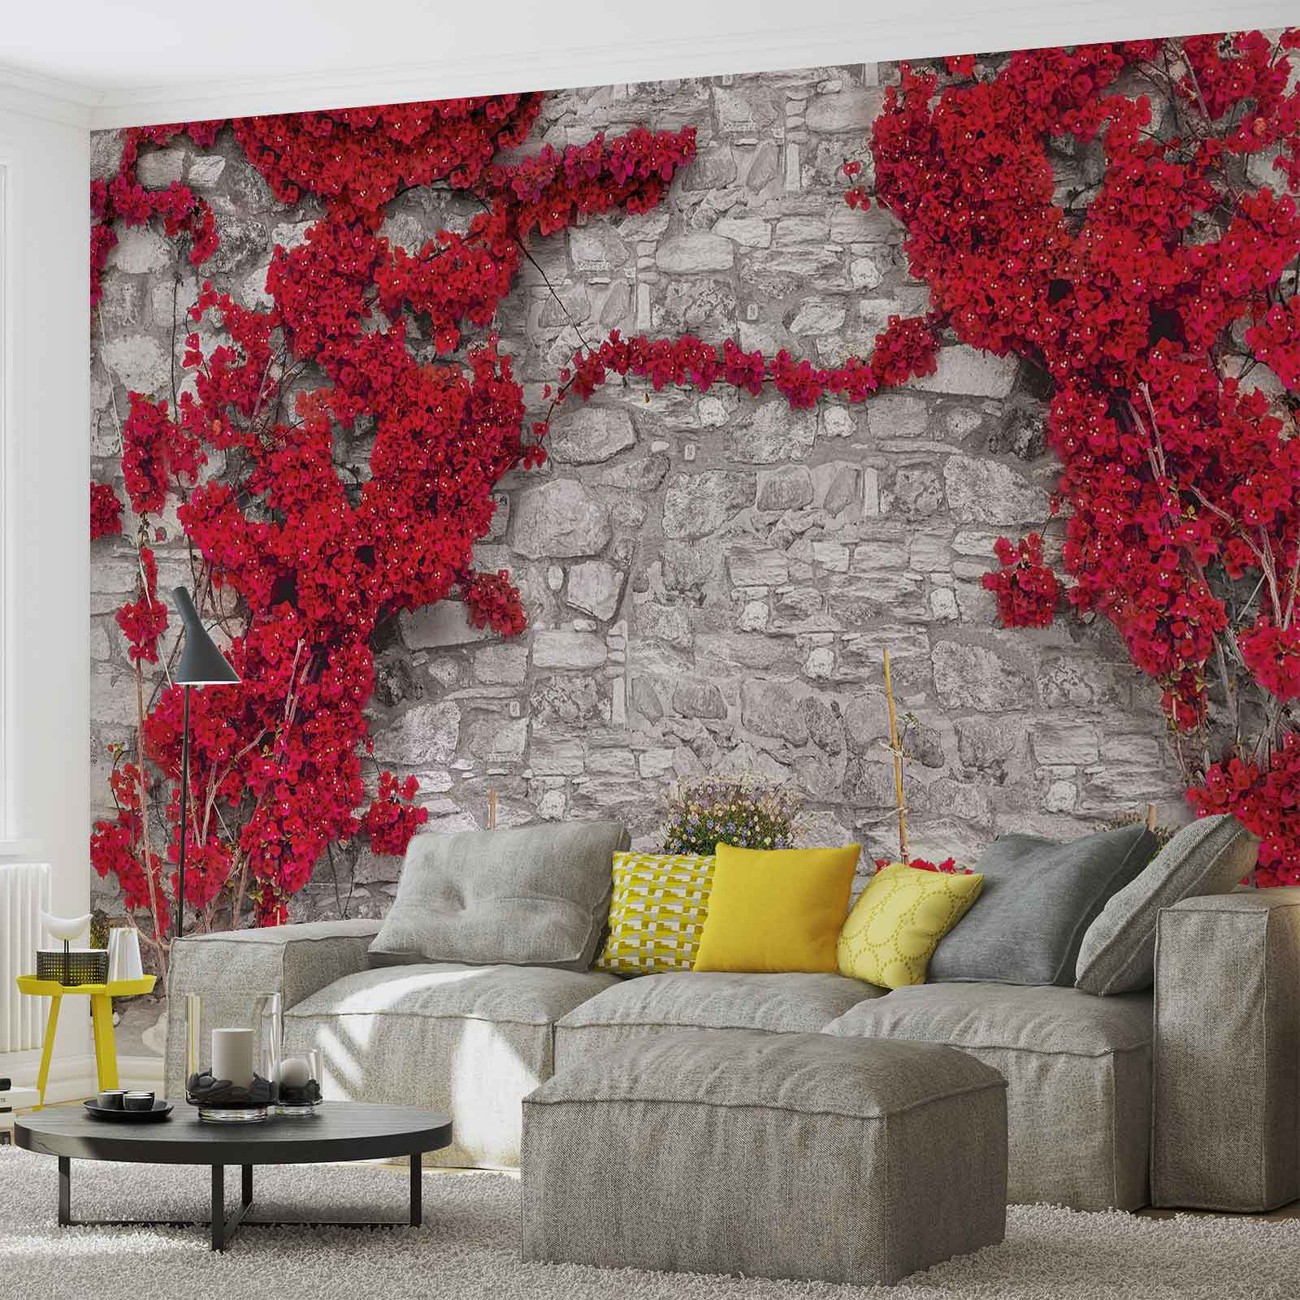 Red Flowers Stone Wall Wall Paper Mural | Buy at UKposters